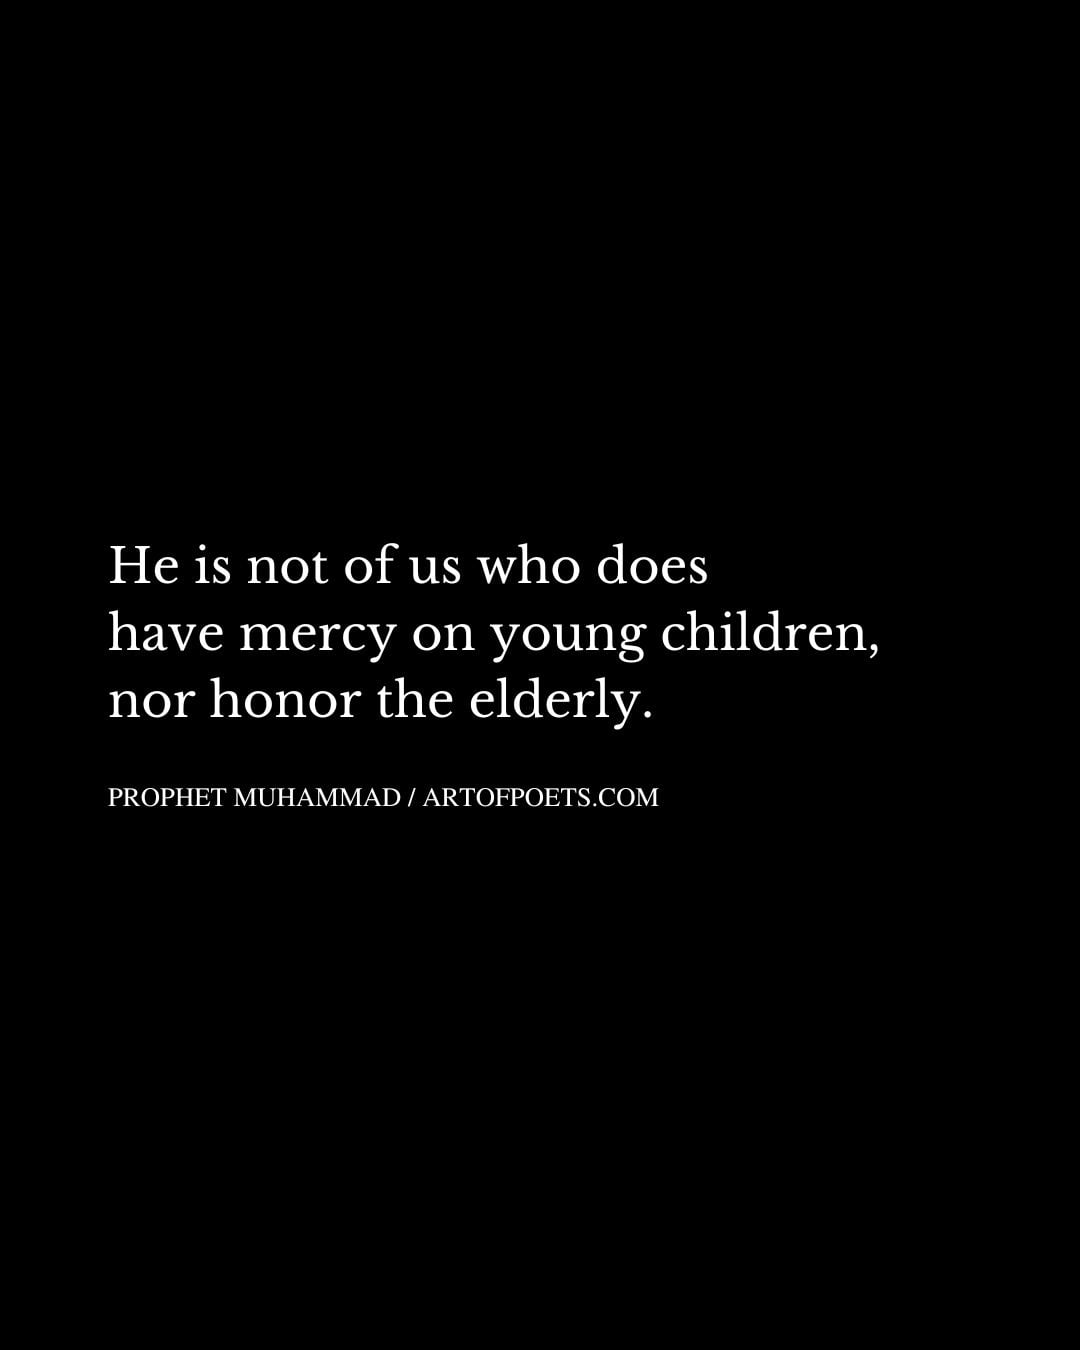 He is not of us who does have mercy on young children nor honor the elderly